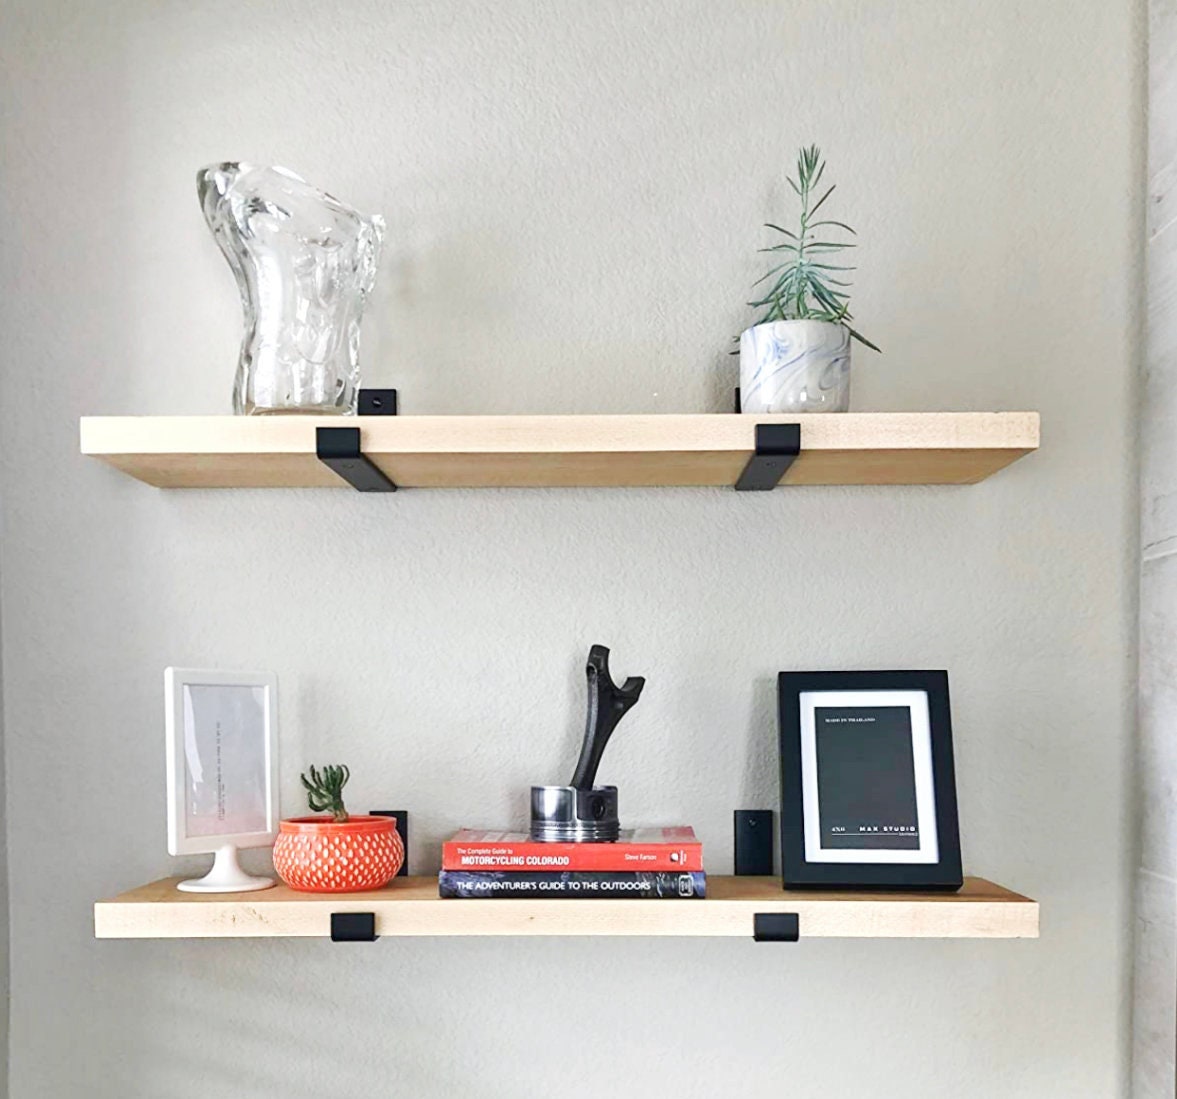 The Floating Wood Shelves in Our Bathroom & Kitchen - Driven by Decor